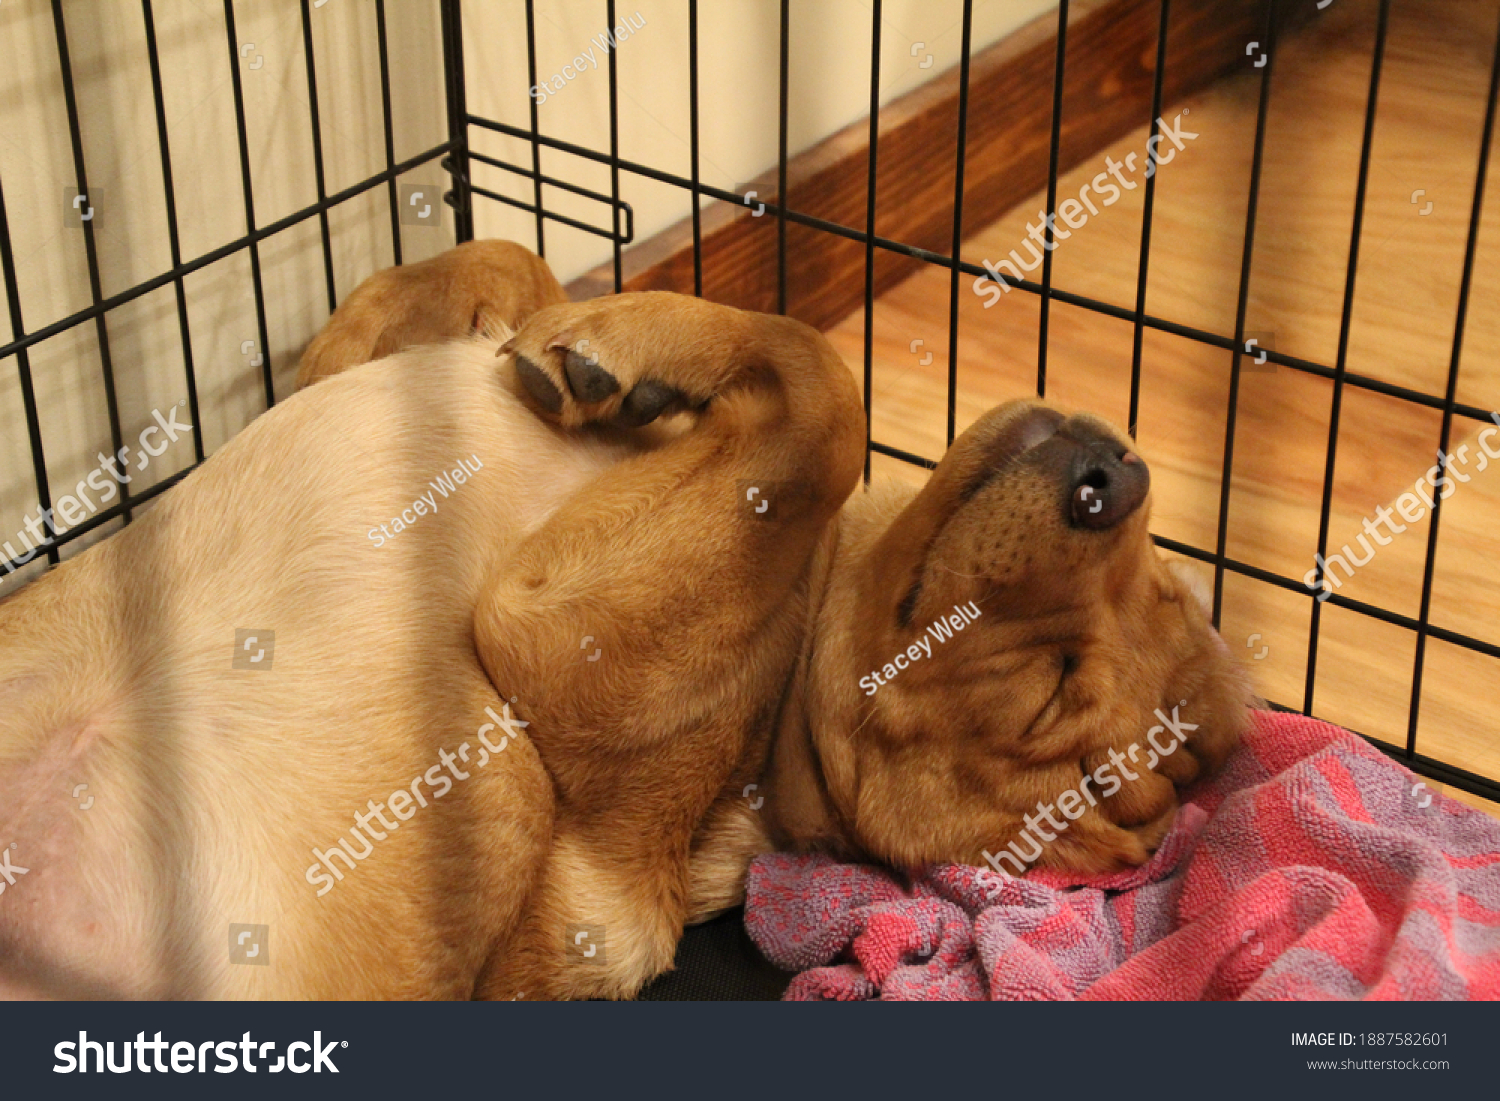 Closeup of happy fox red Labrador retriever puppy inside wire crate sleeping on his back with shallow depth of field #1887582601